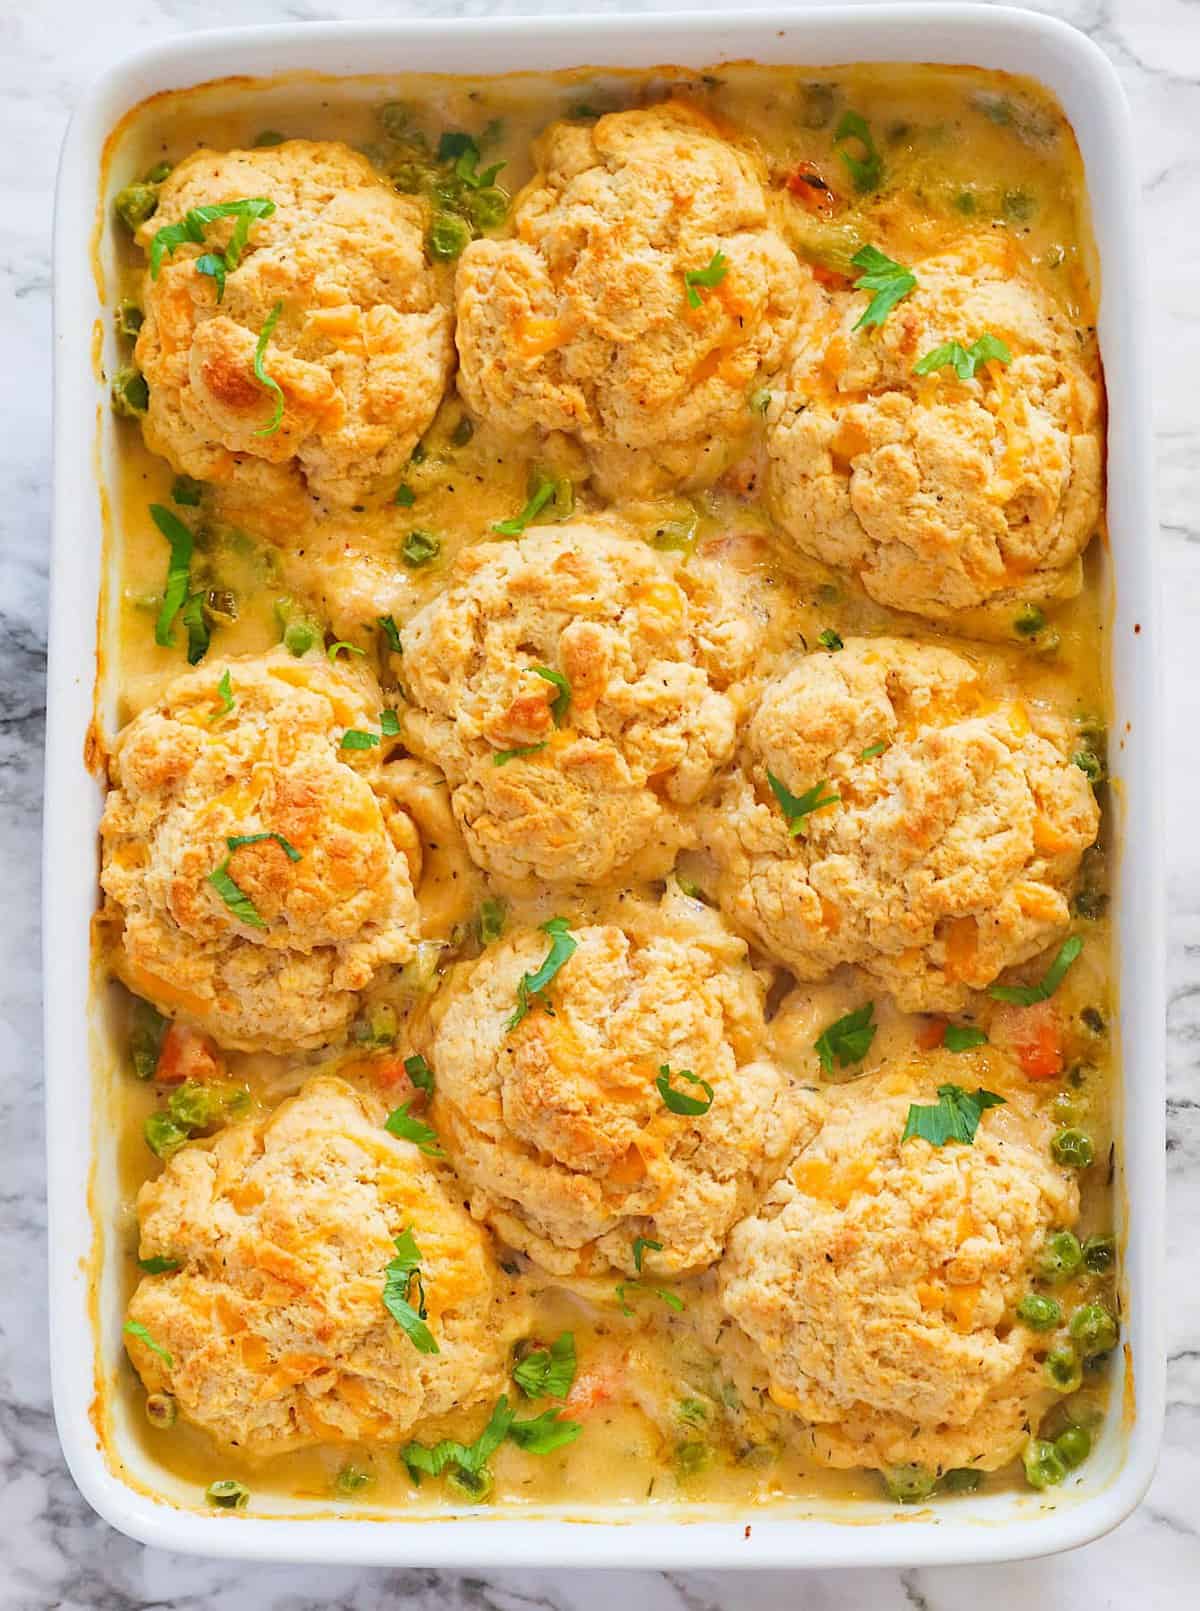 Creamy Chicken and Biscuits fresh from the oven and ready to serve